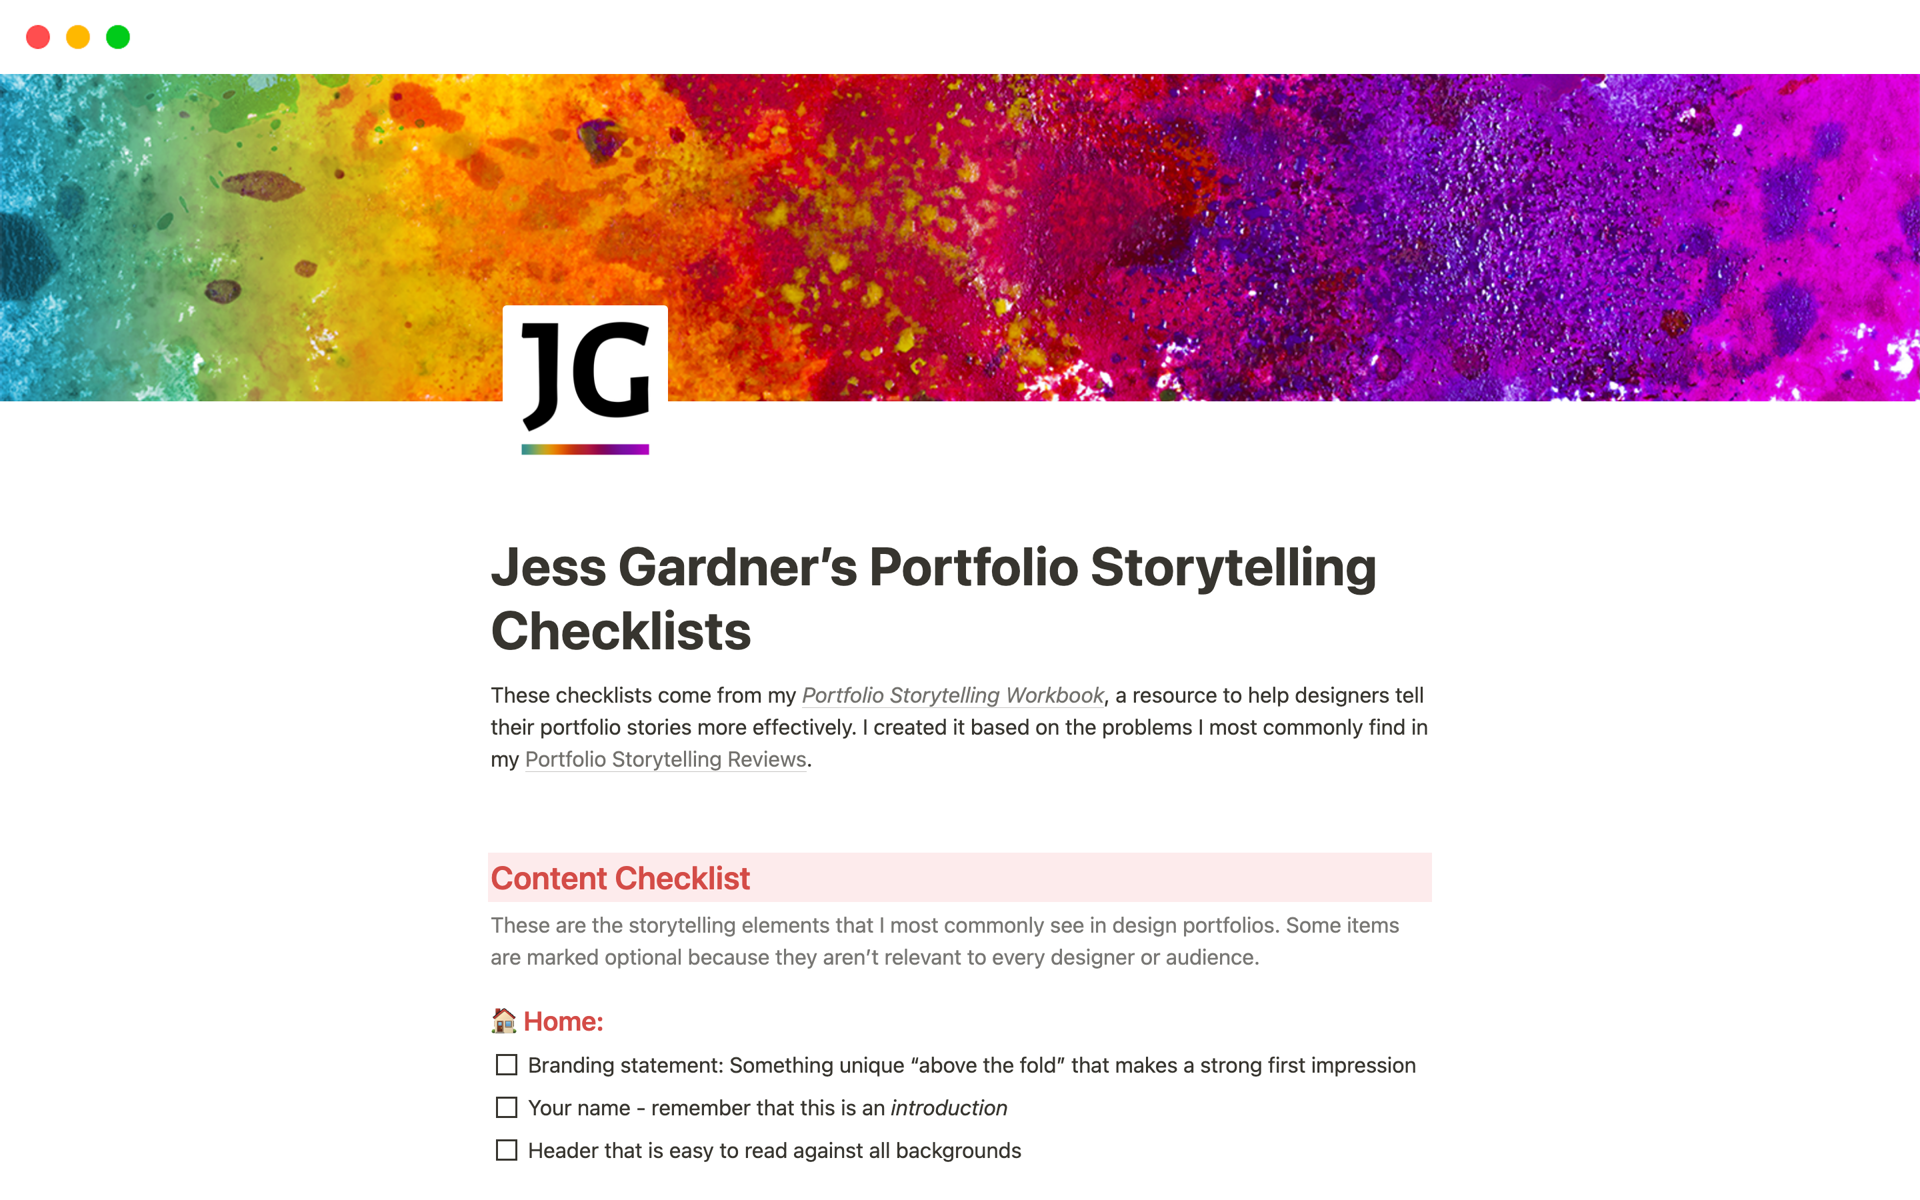 Improve your portfolio storytelling with checklists for your content, writing style, and visuals.